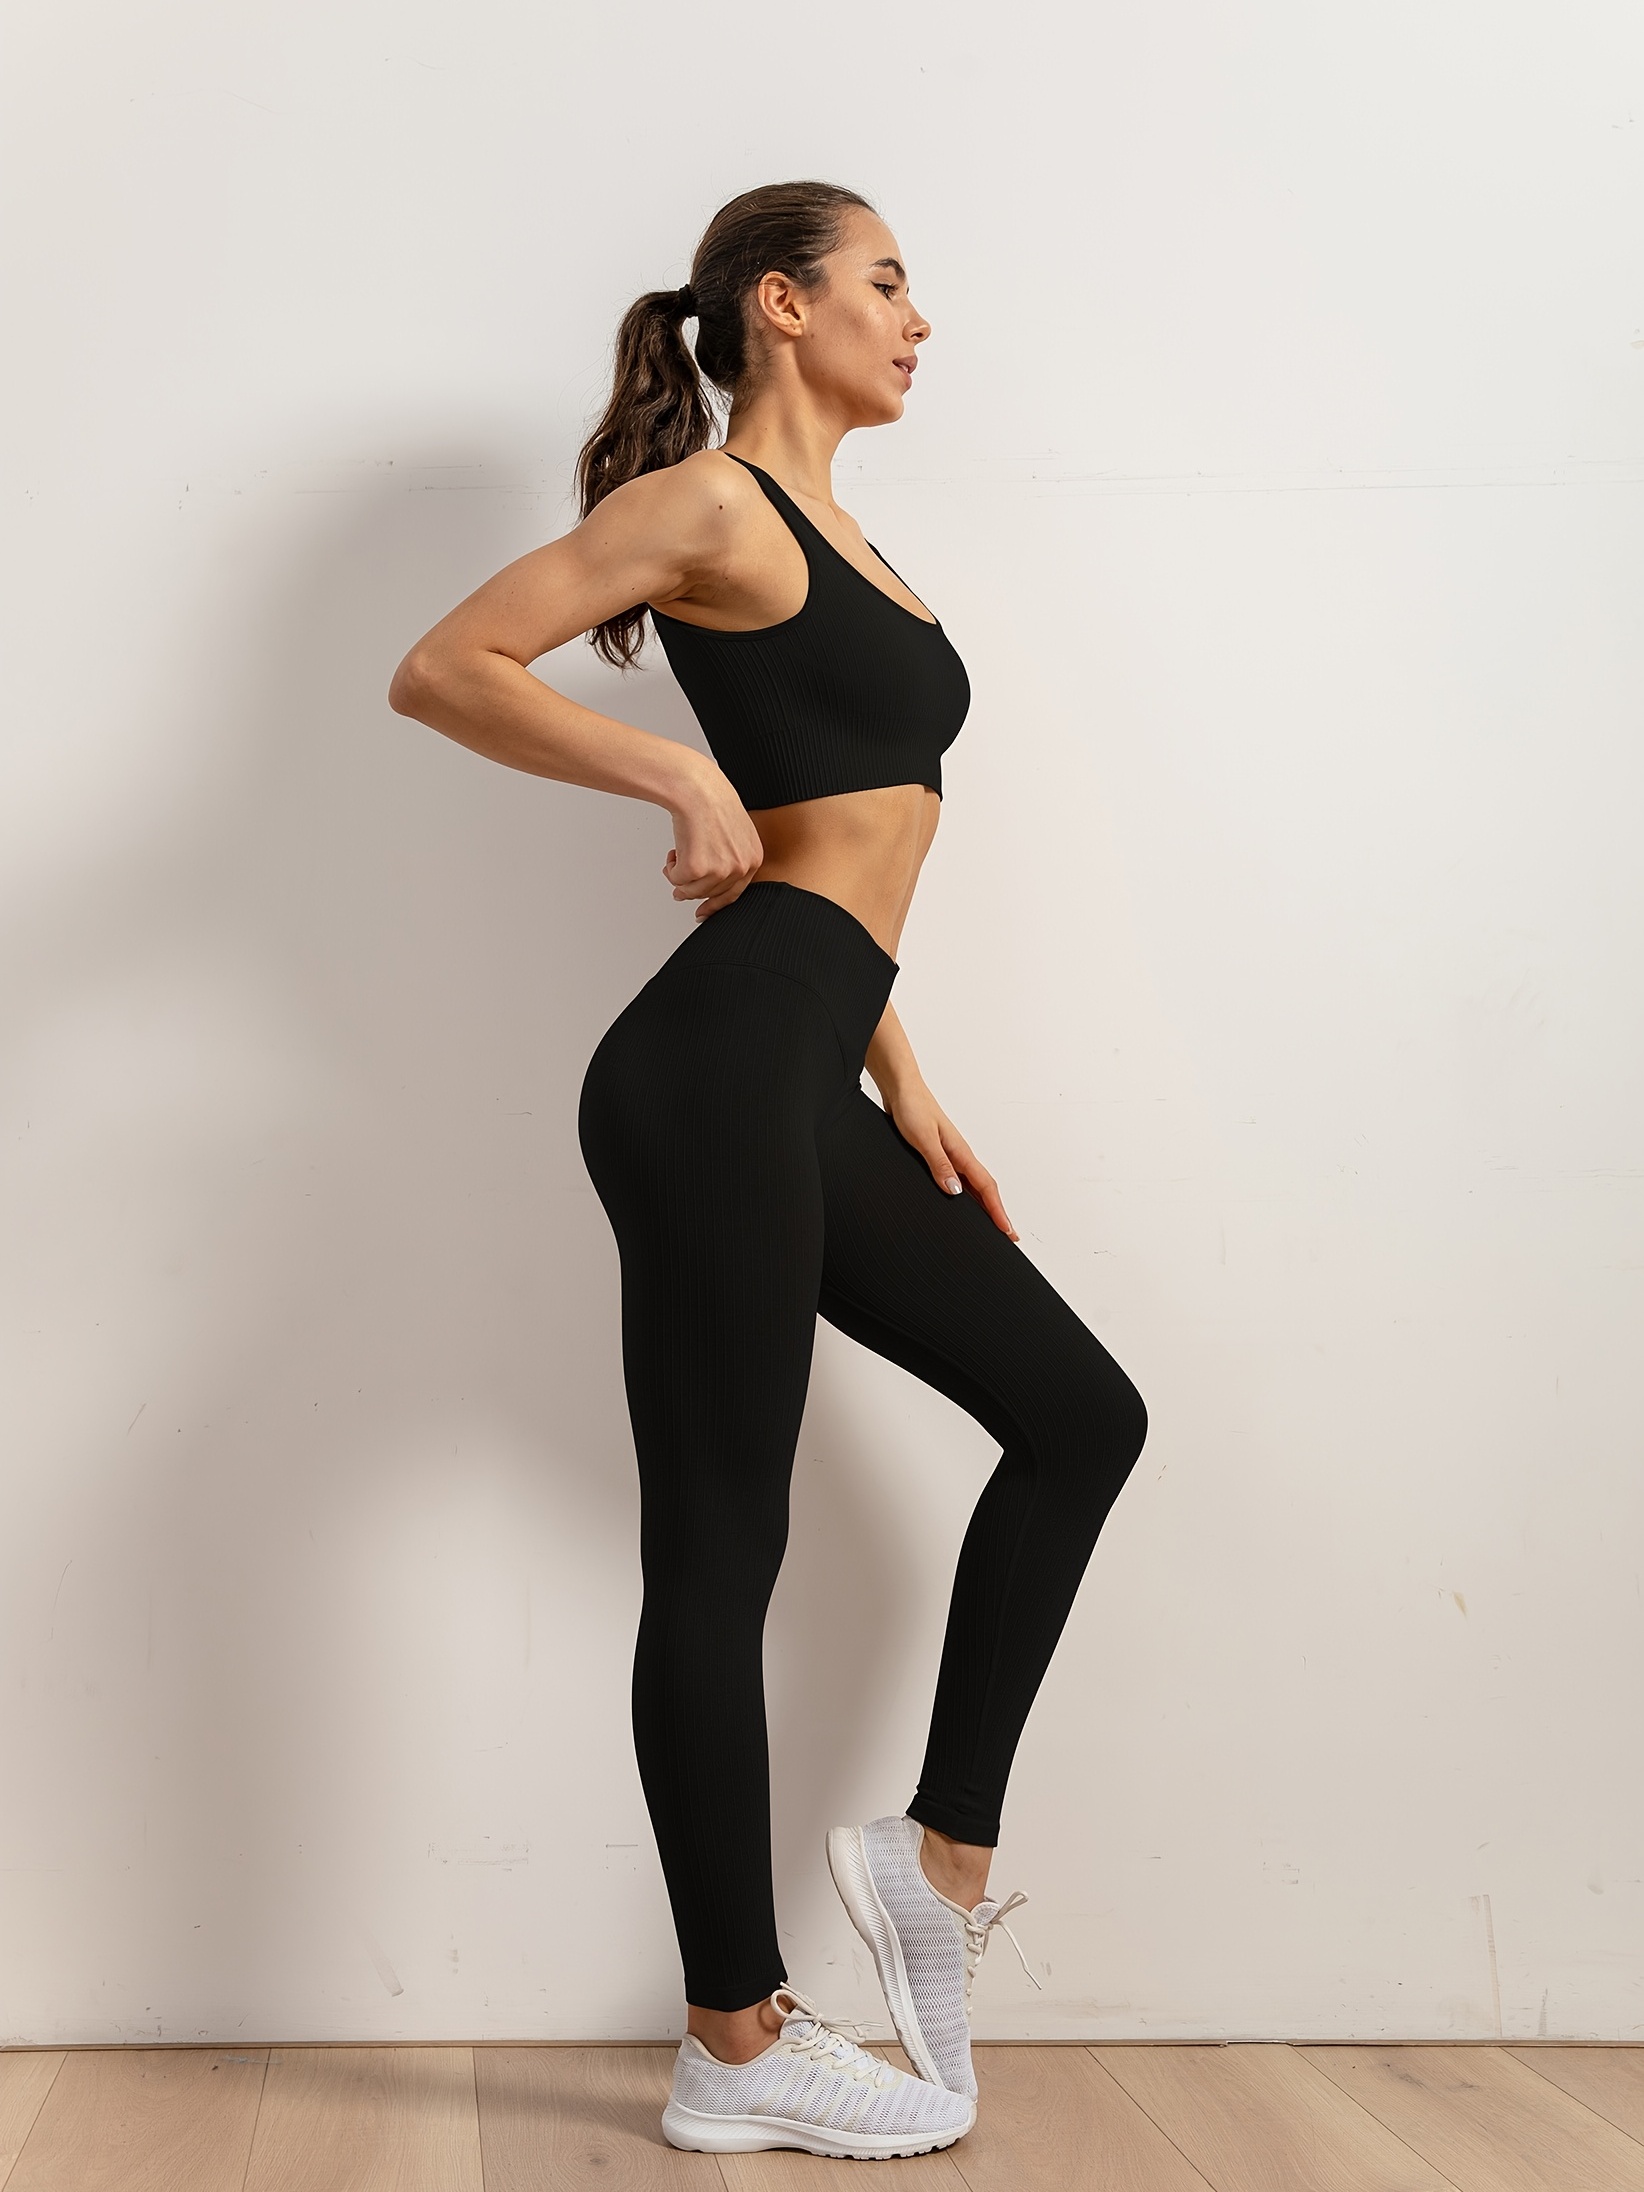 Women's Athletic Shorts, Workout Leggings and Pants